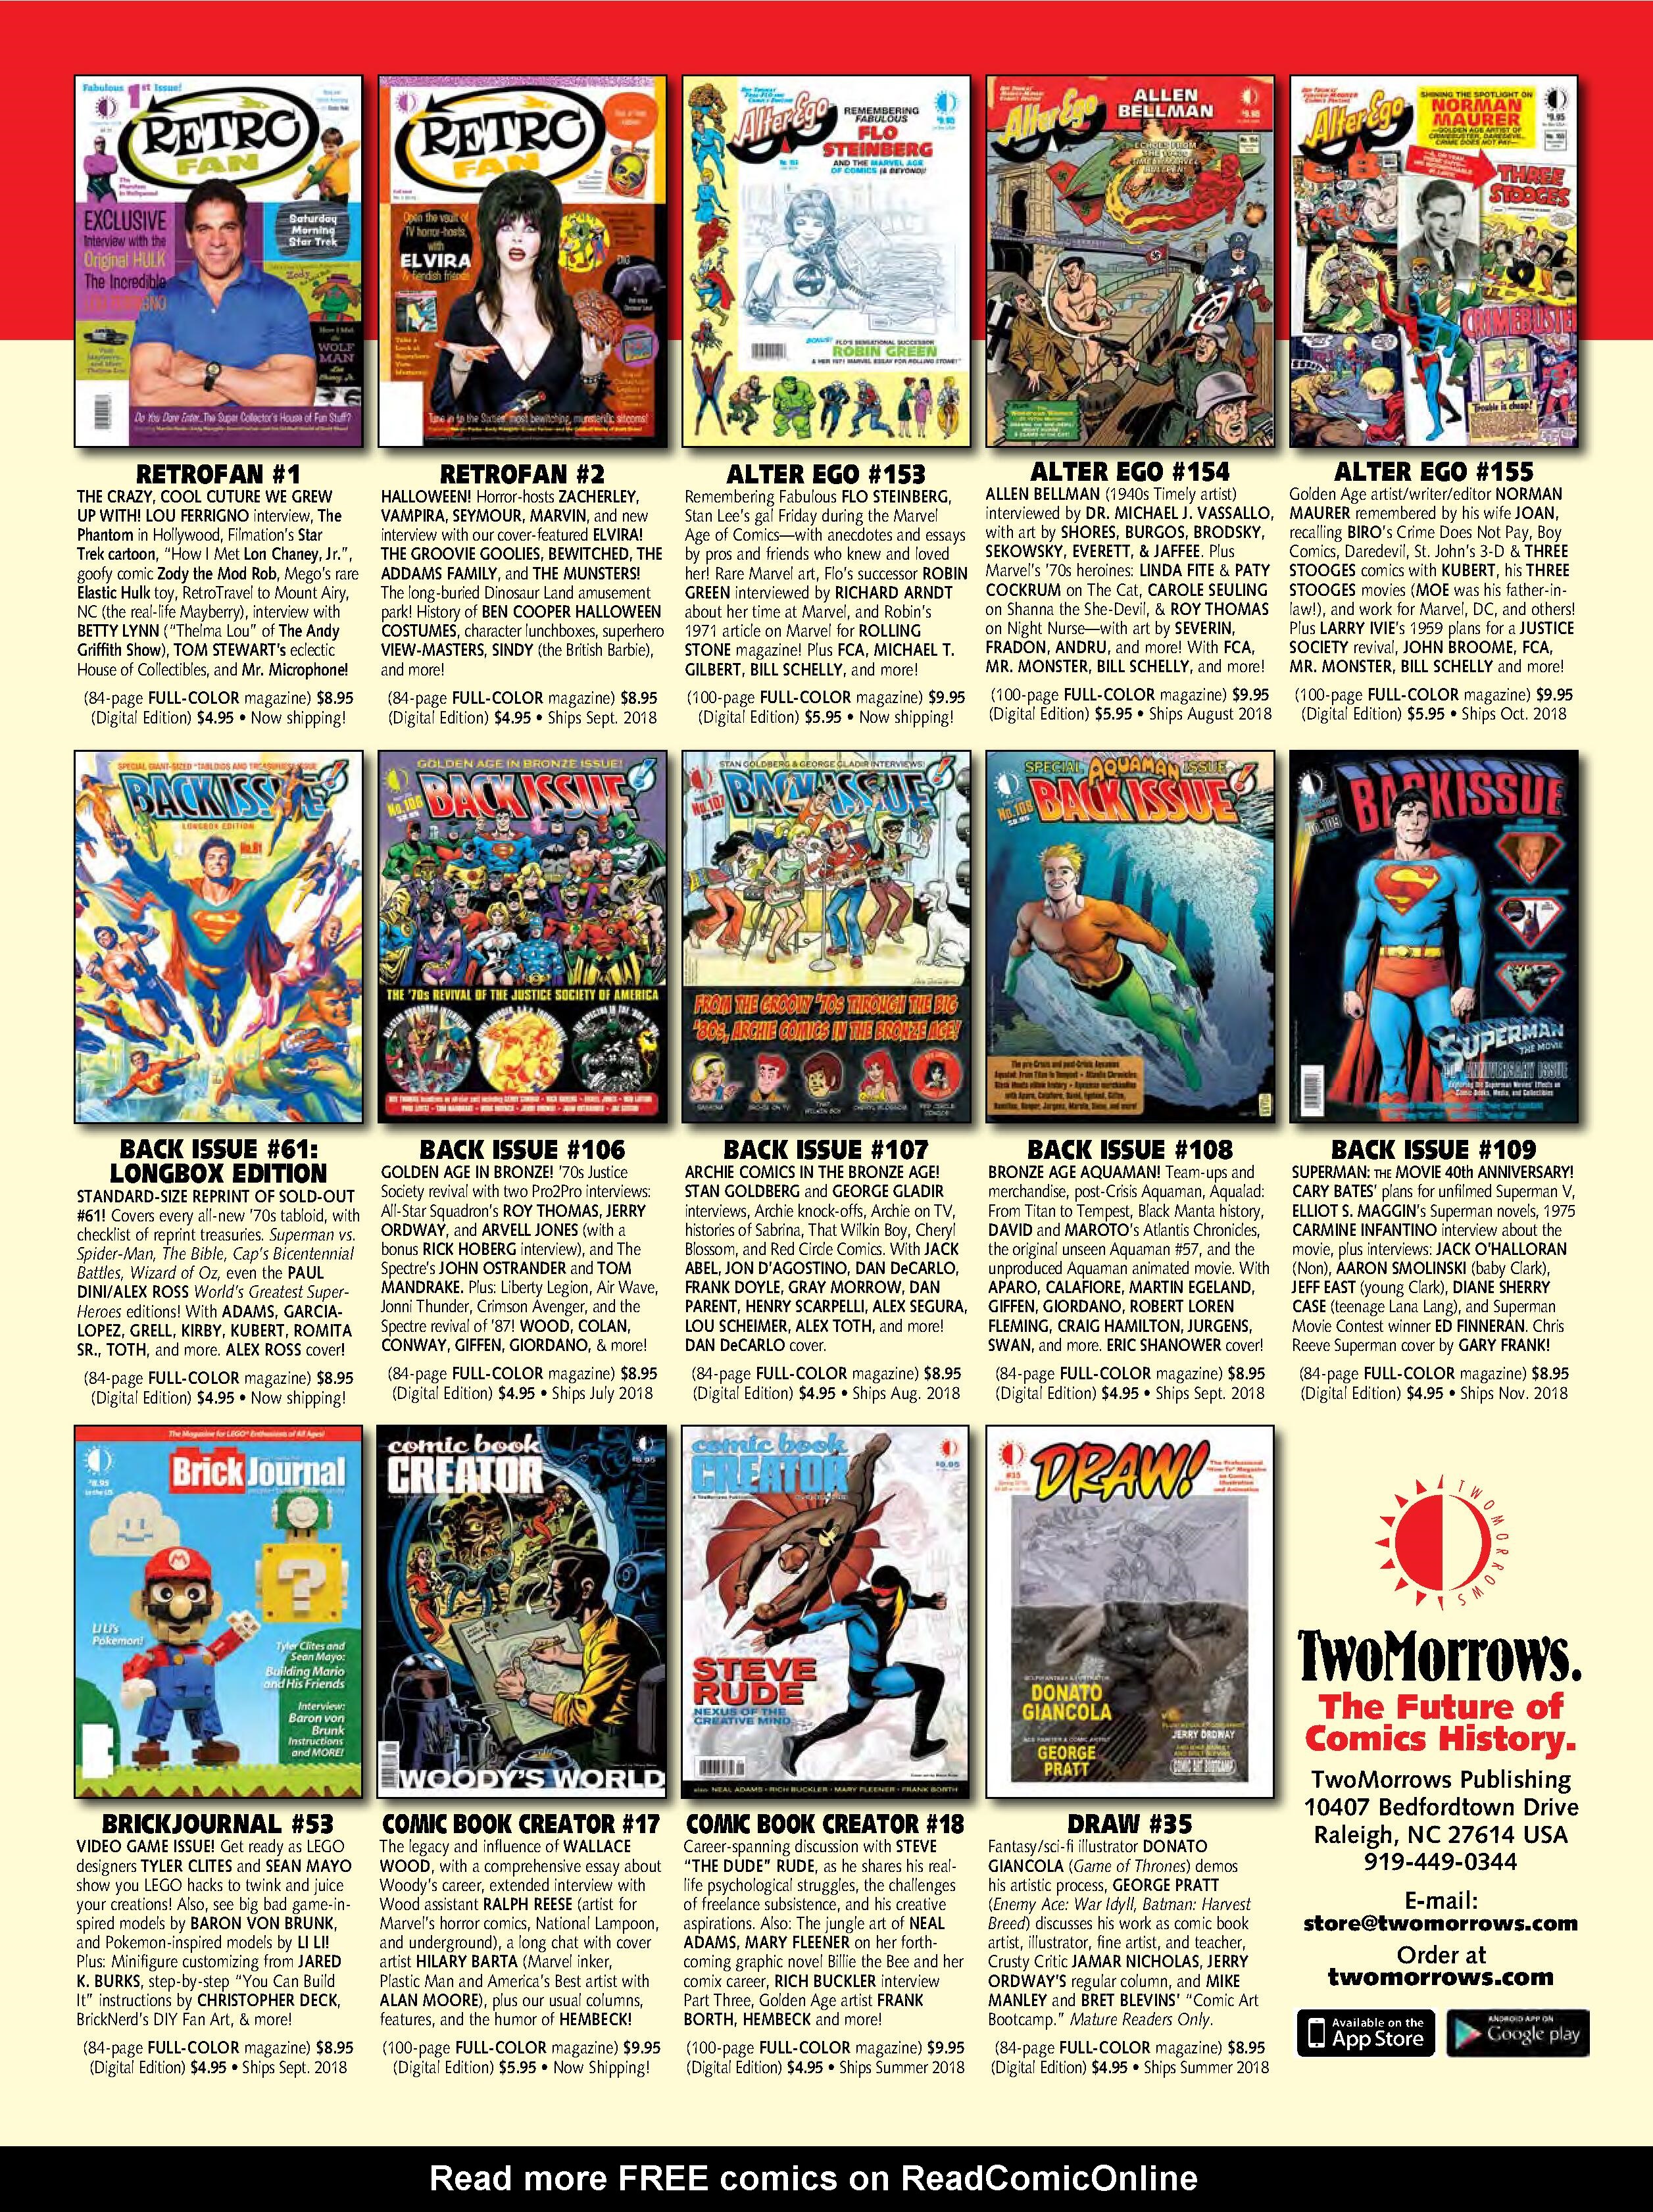 Read online Back Issue comic -  Issue #105 - 83